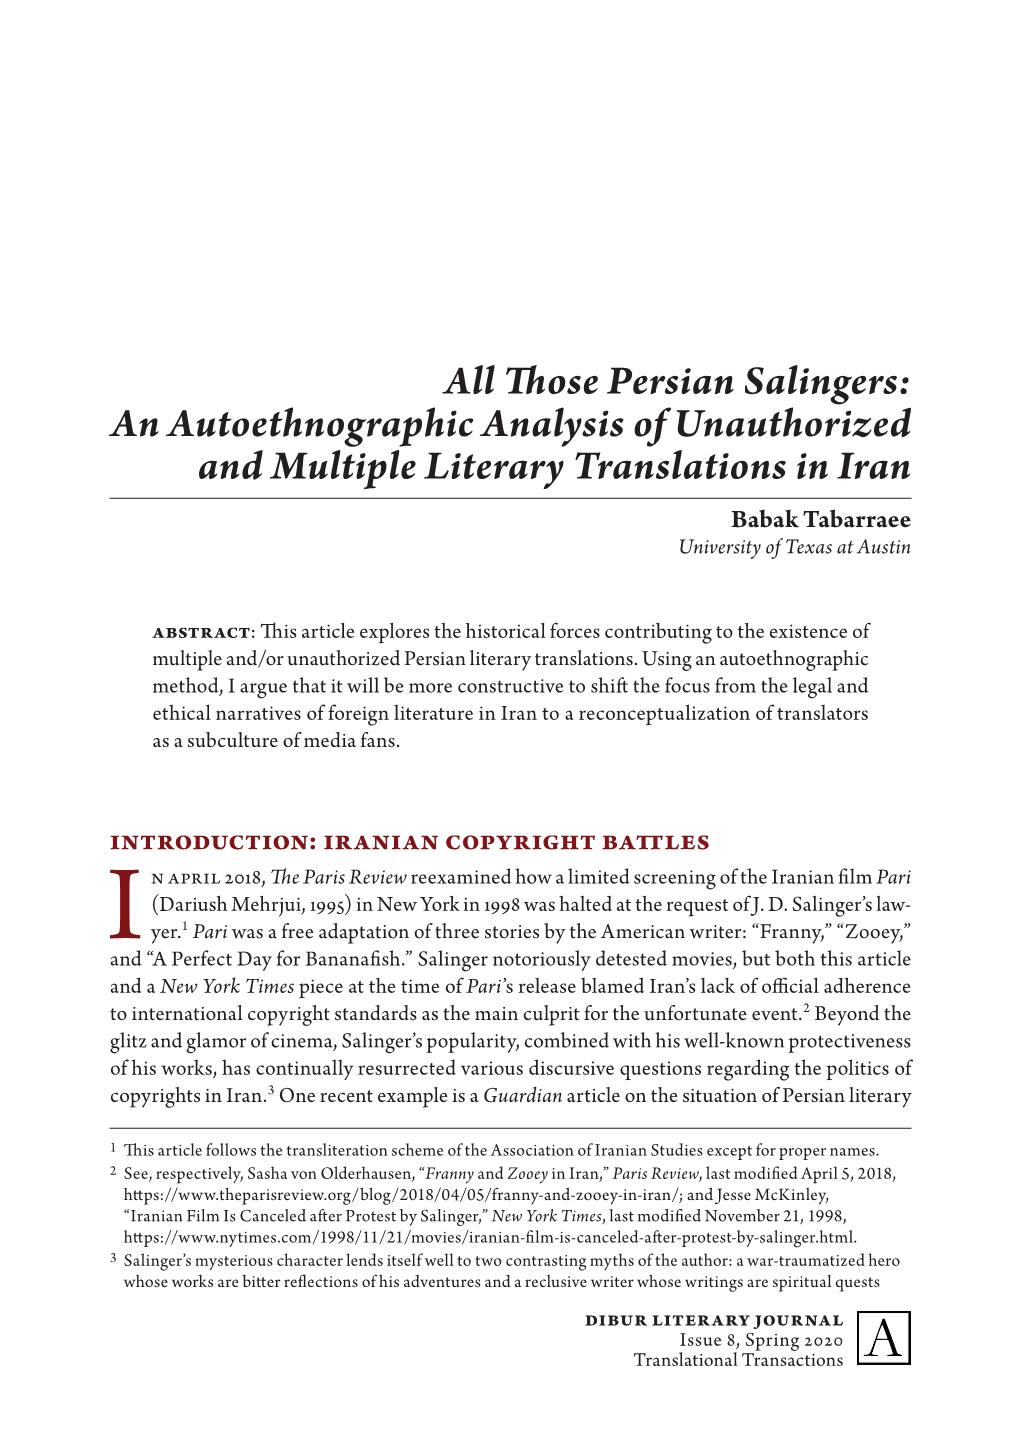 All Those Persian Salingers: an Autoethnographic Analysis of Unauthorized and Multiple Literary Translations in Iran Babak Tabarraee University of Texas at Austin